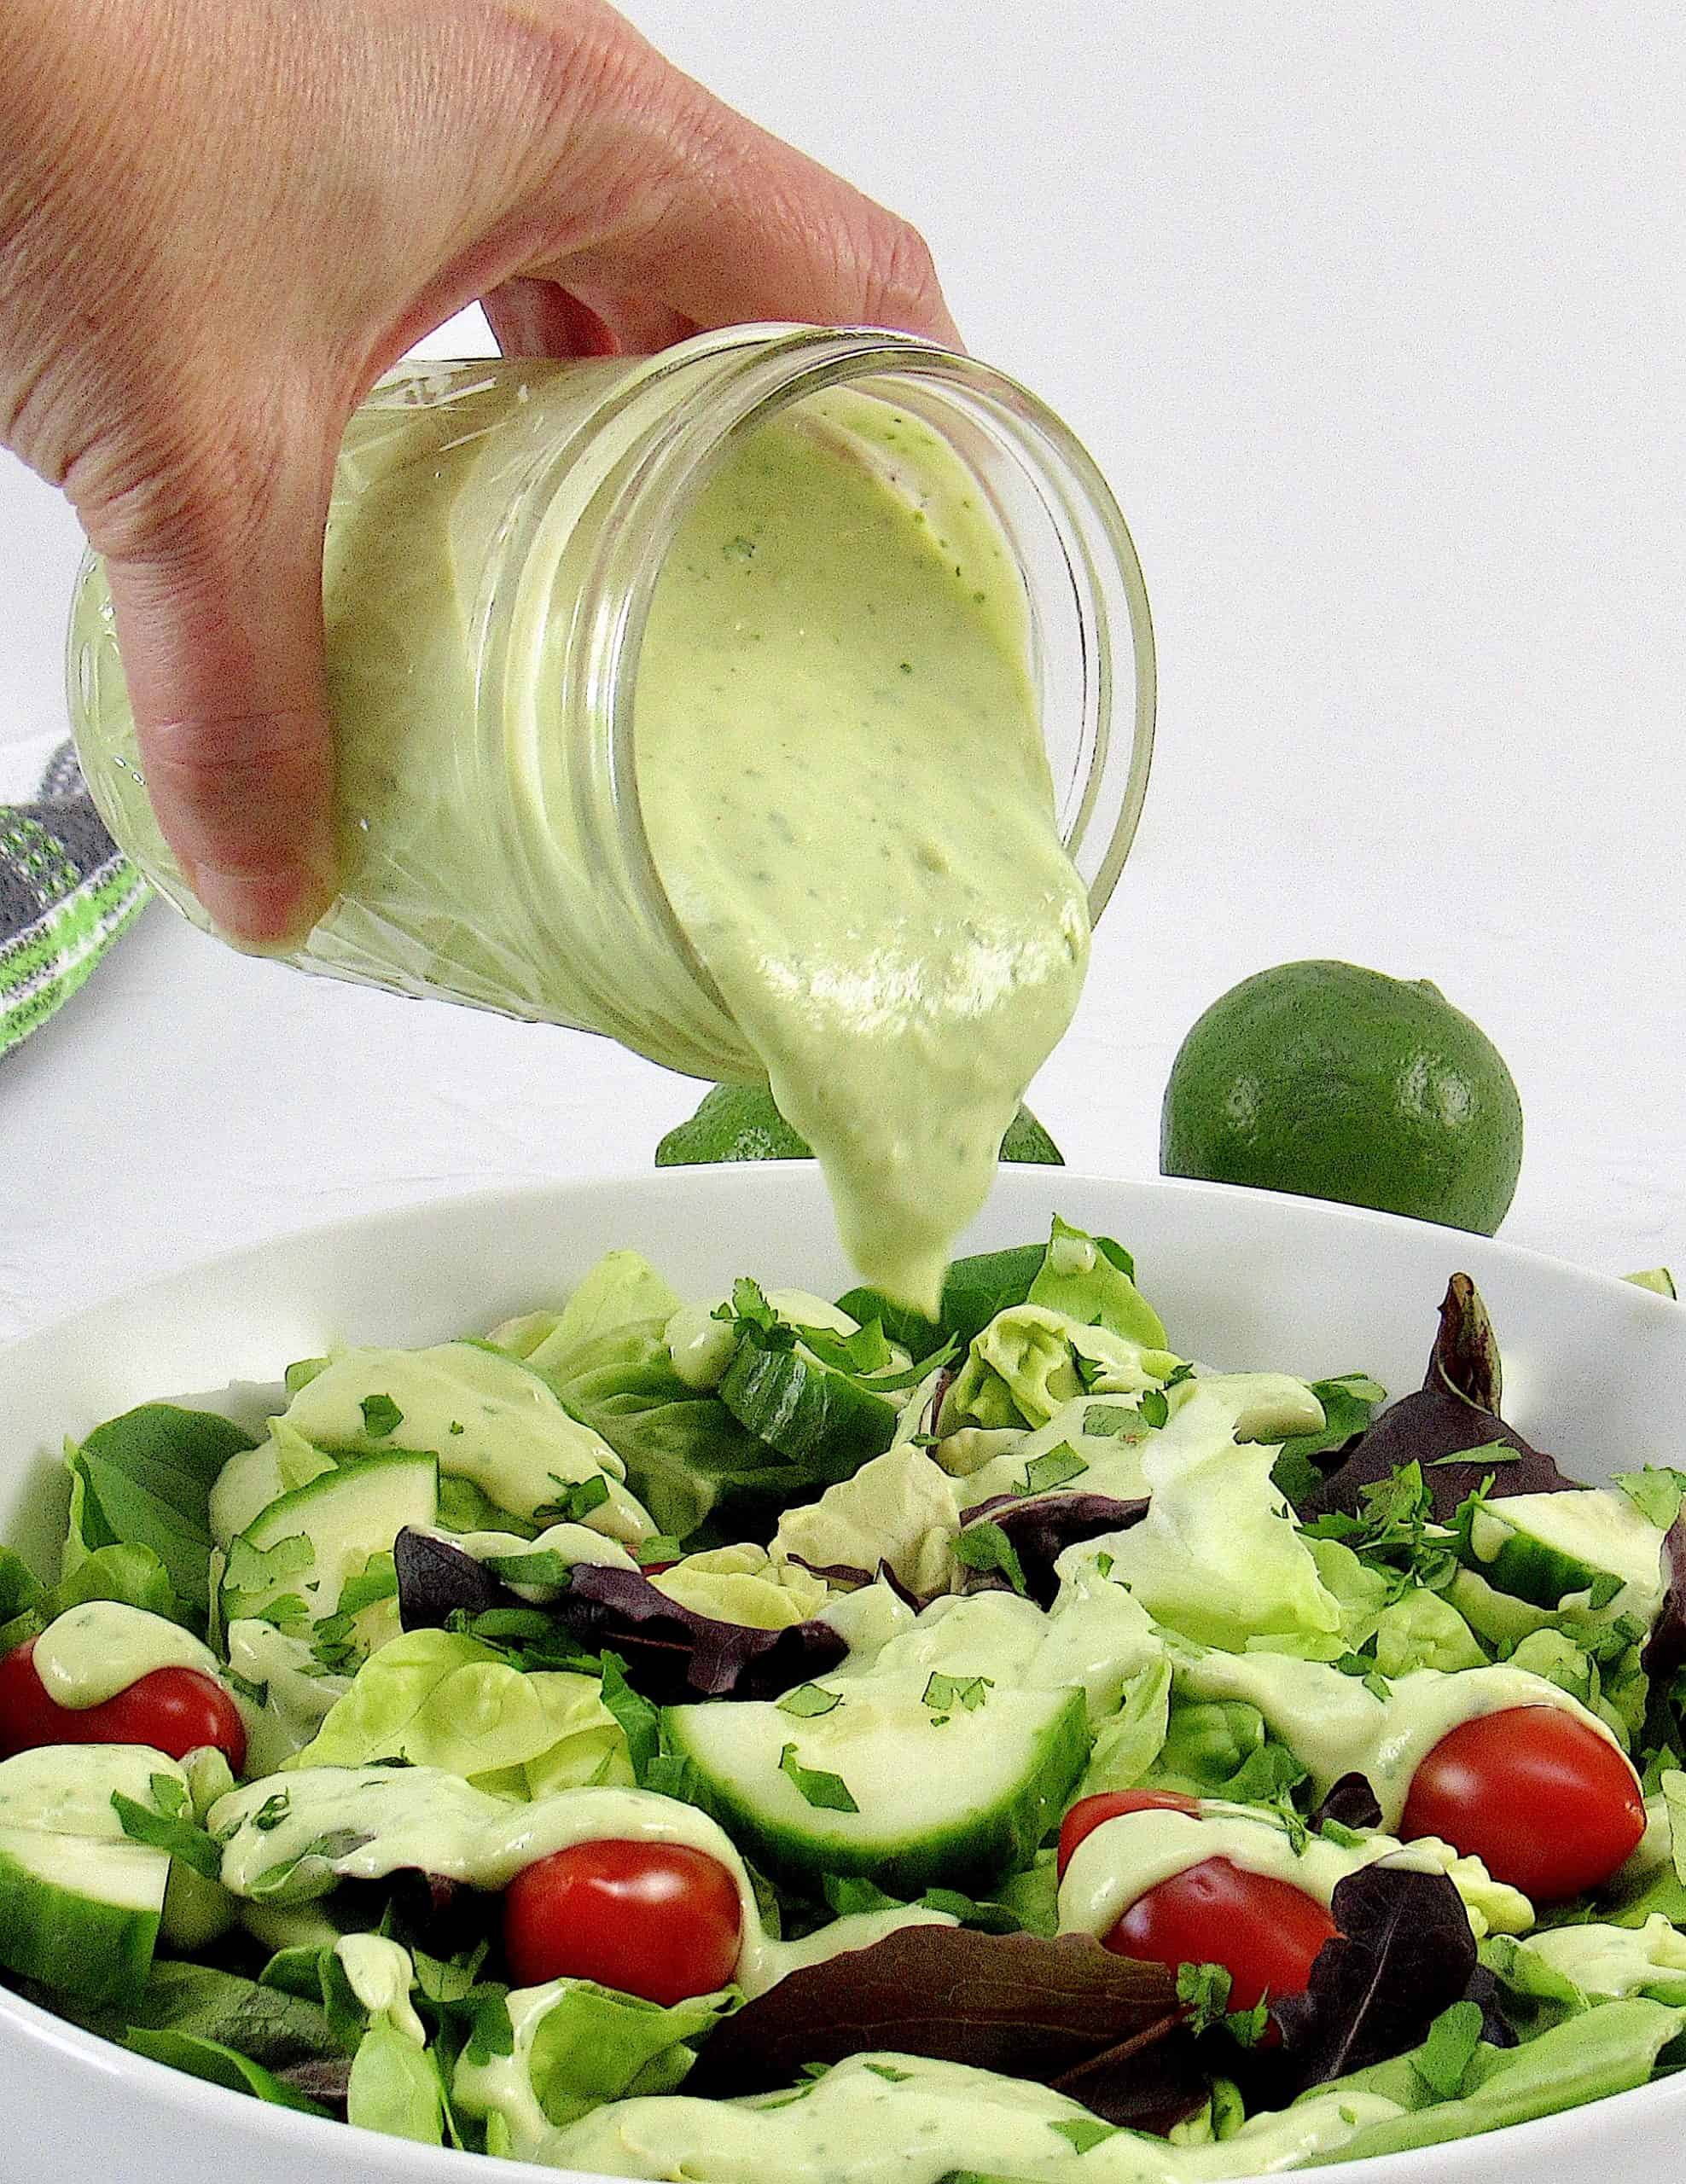 Avocado ranch dressing being poured over salad